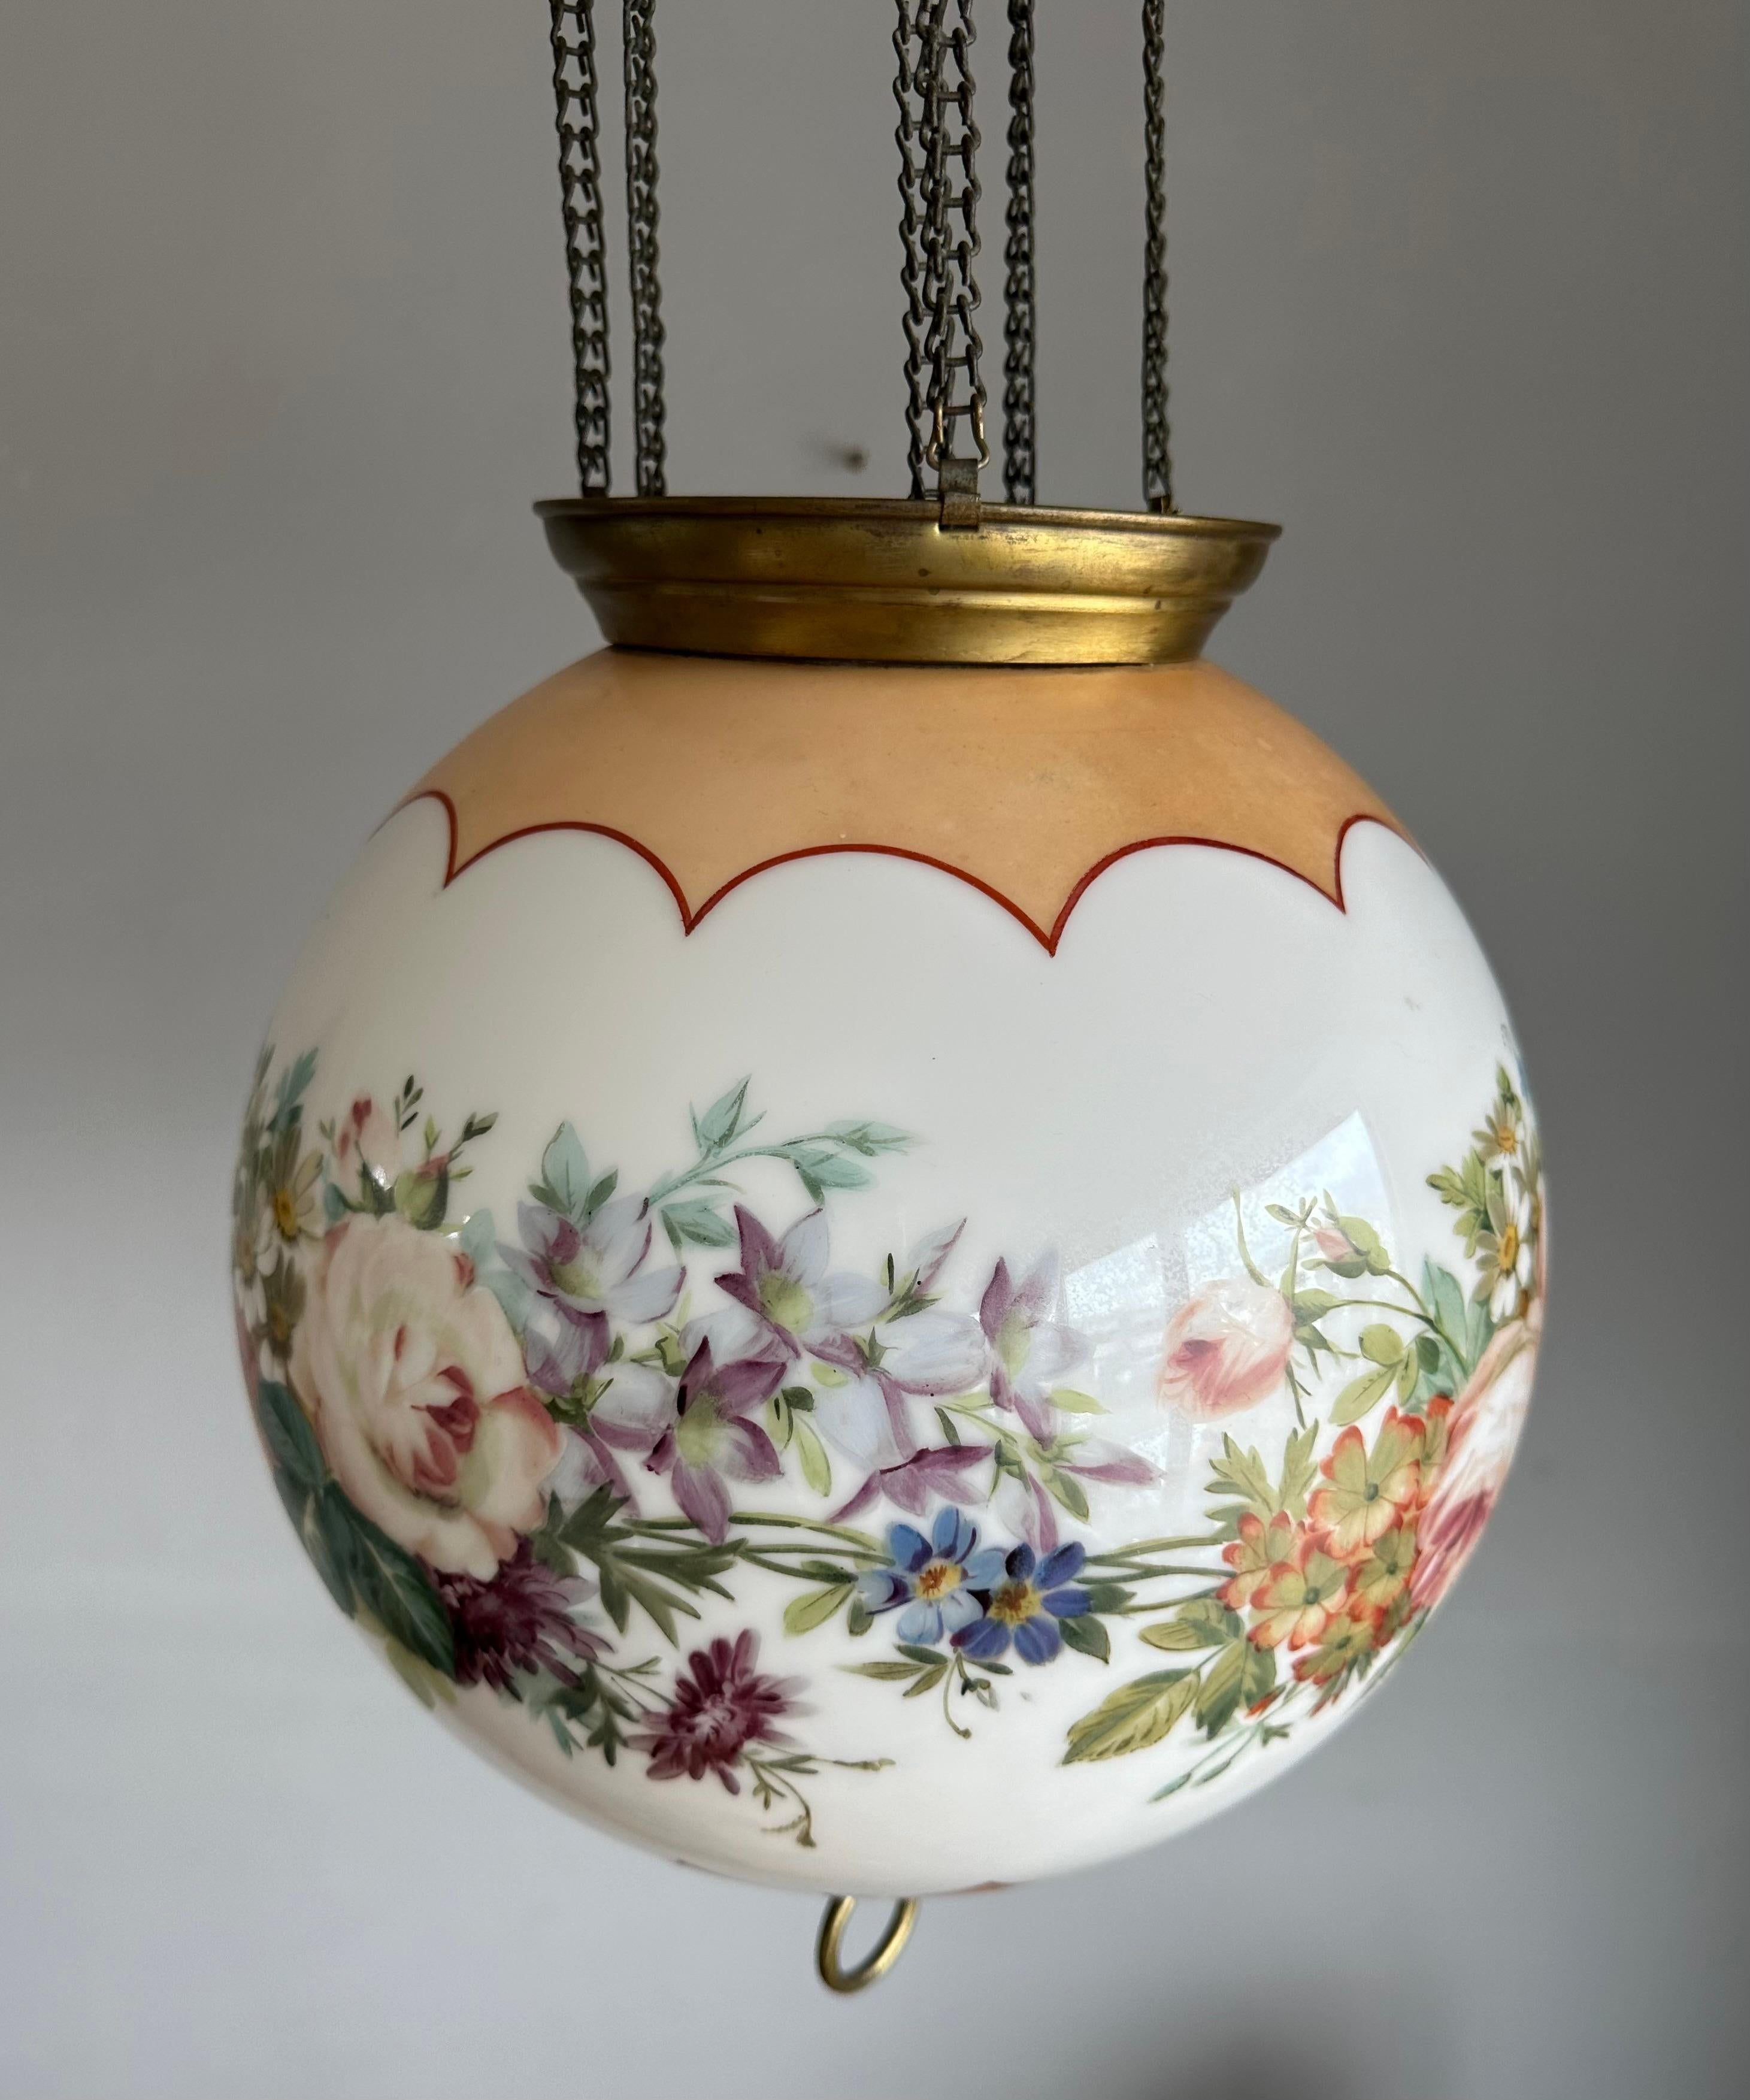 Antique Round Opaline Glass Shade Pendant Light with Wreath of Flowers Decor For Sale 2